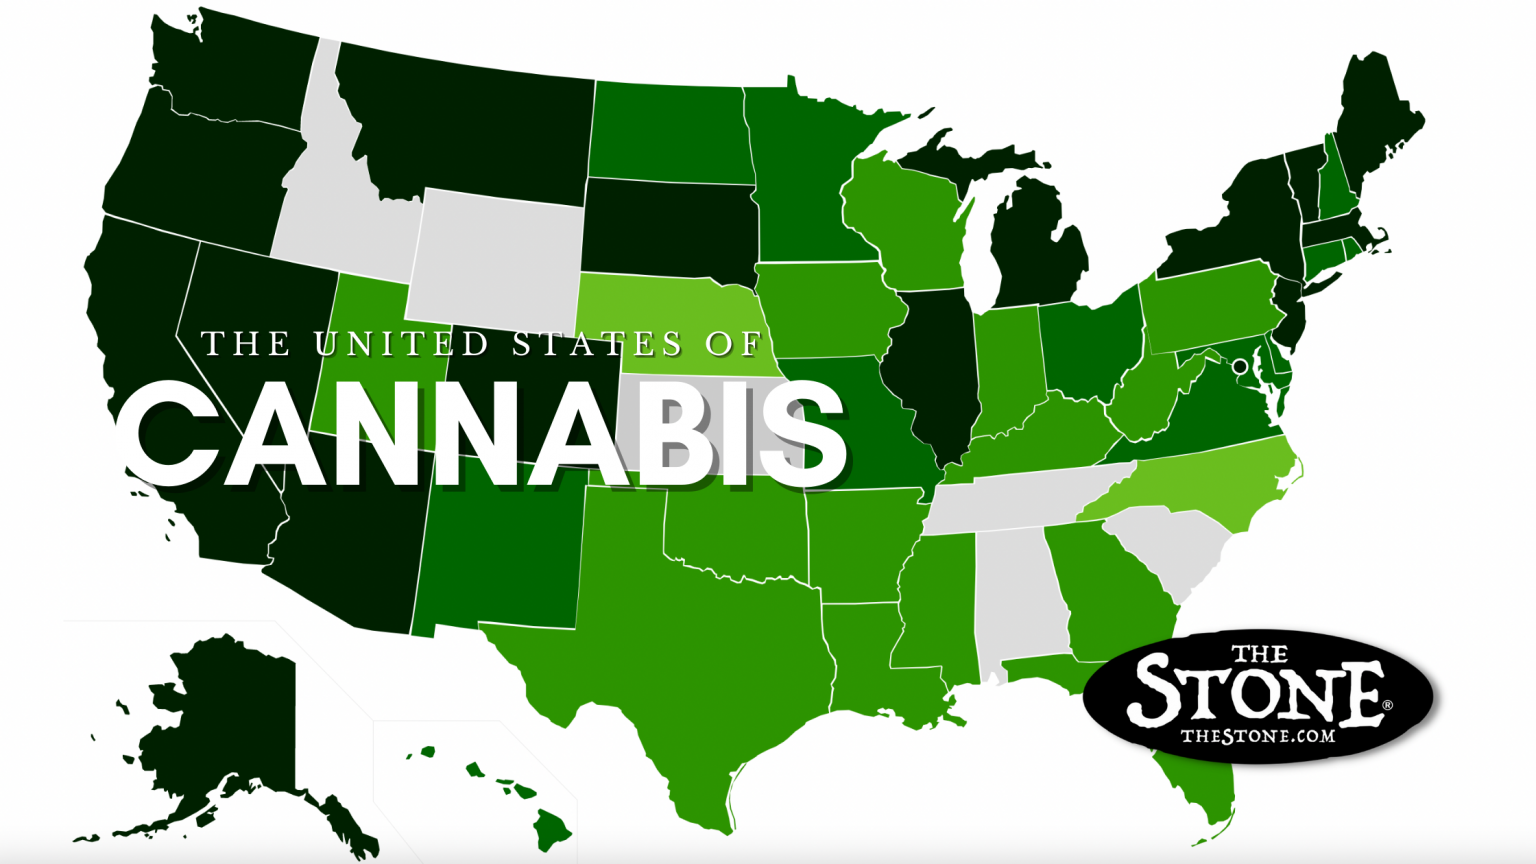 Recreational Marijuana Legalization is Sweeping the Nation! Here’s a List of States Where it’s Legal